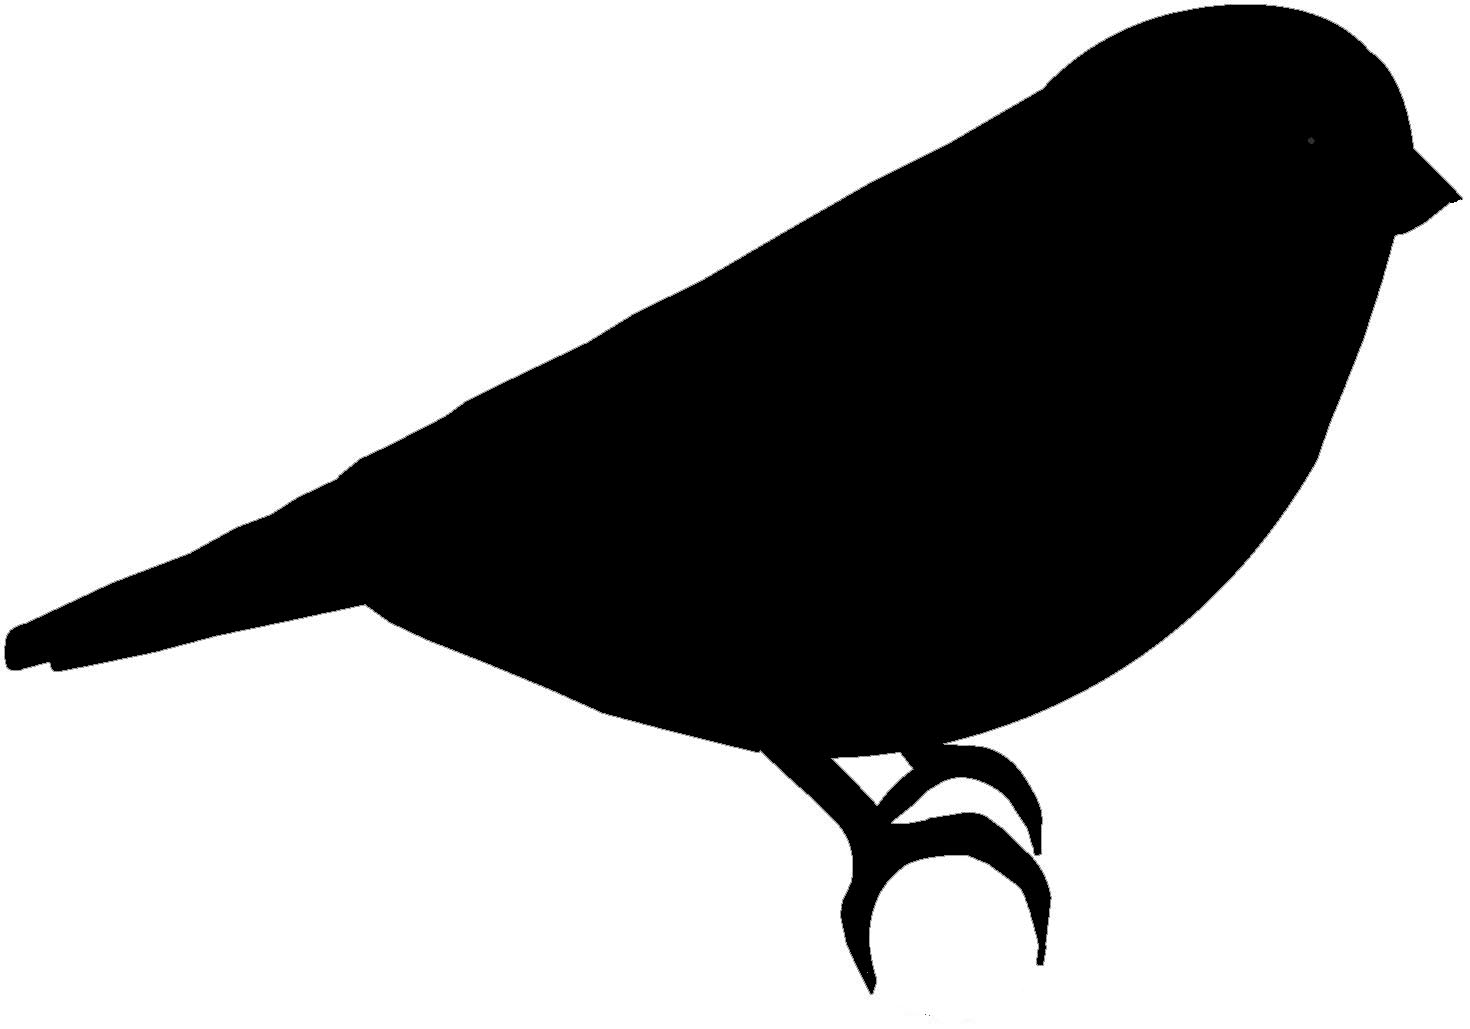 Bird Silhouette Images - Clipart library